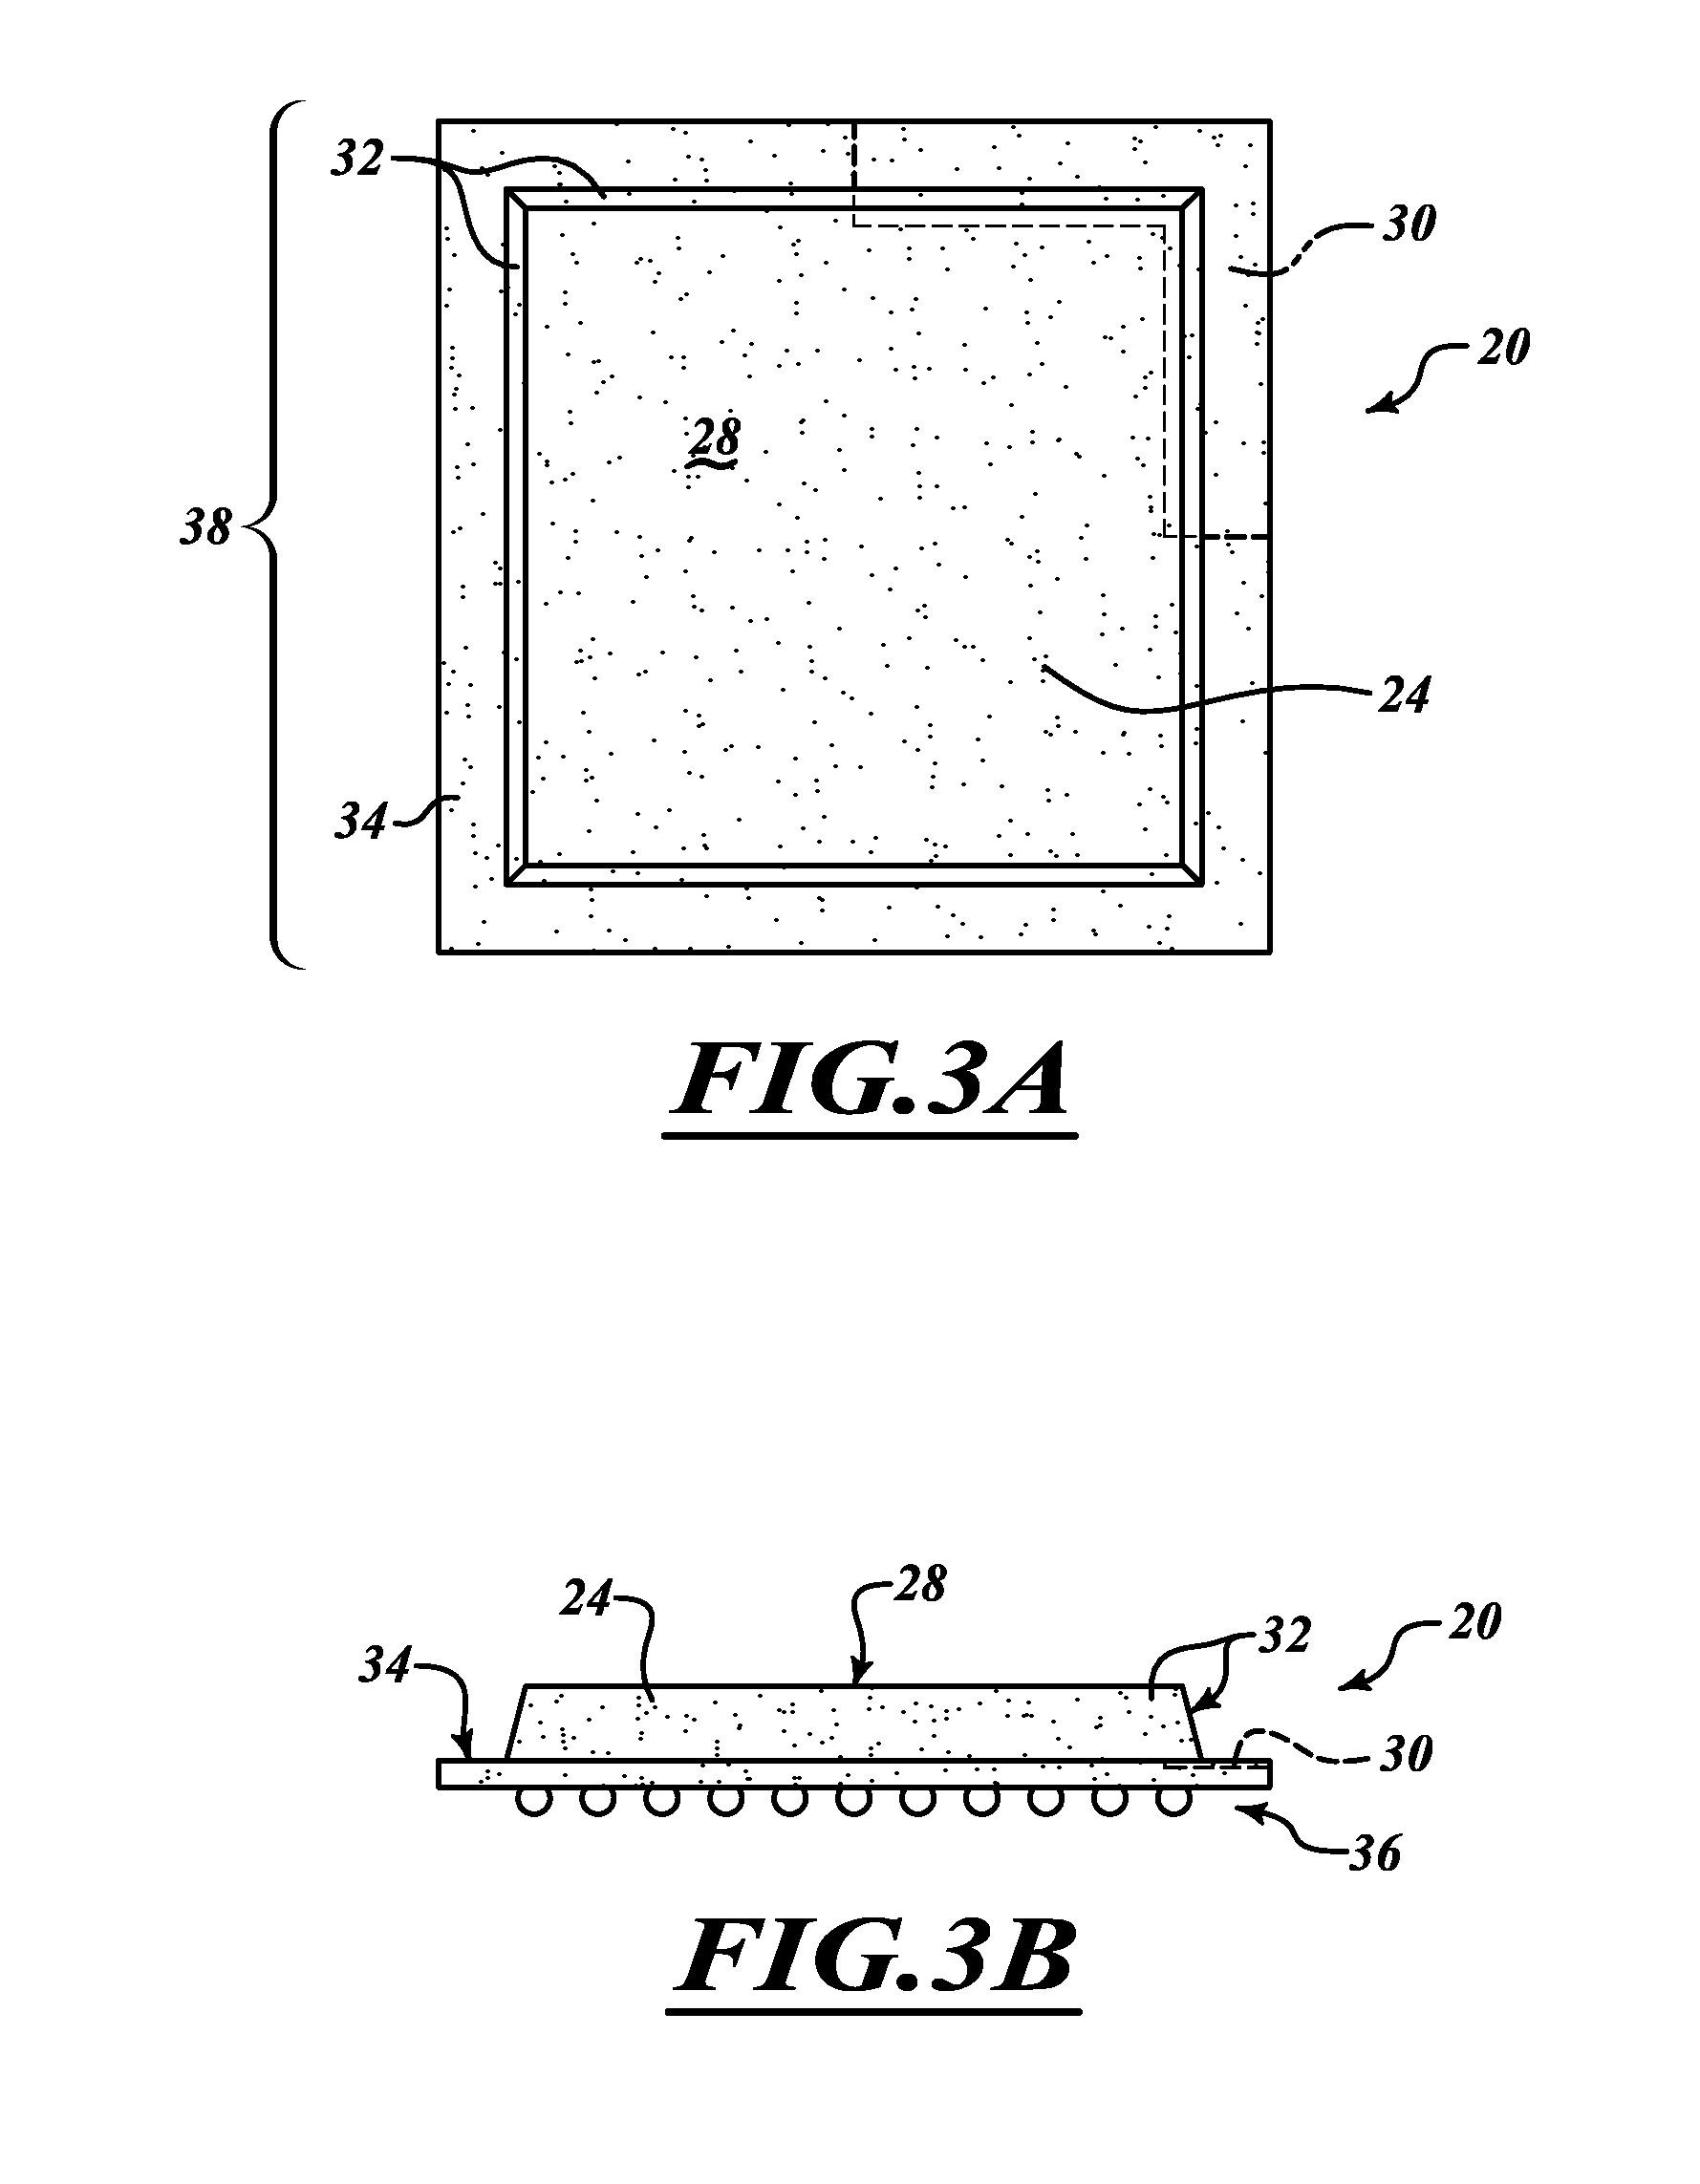 Electromagnetic interference shielding on semiconductor devices